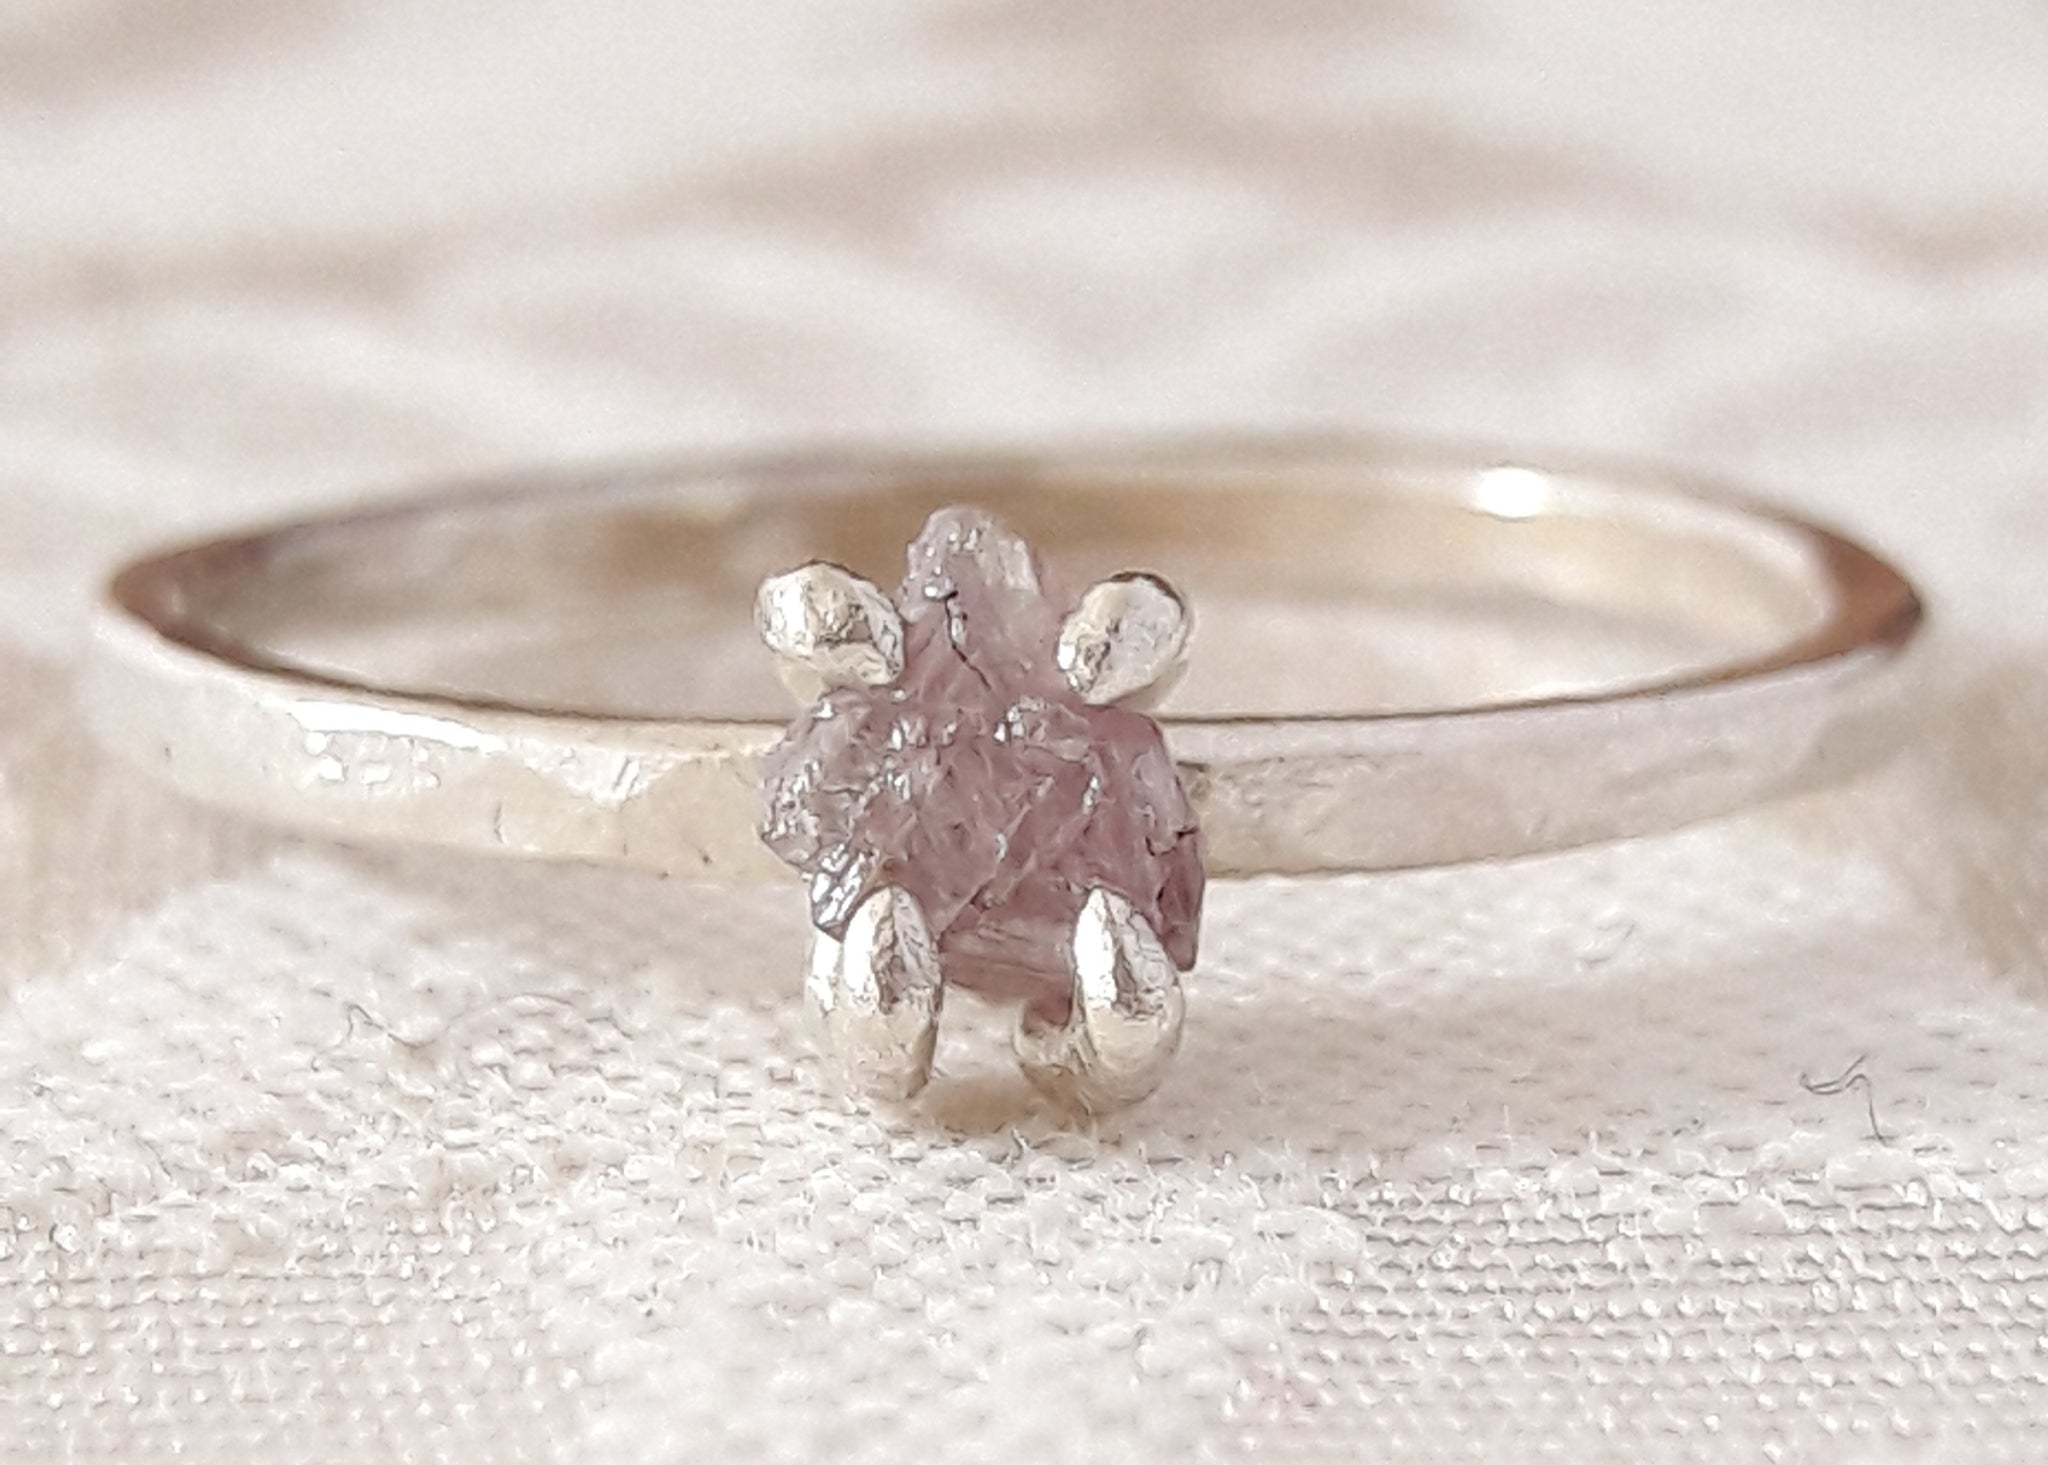 Raw Diamond Engagement Ring Rough Diamond Jewelry Natural and Uncut Diamond  Wedding Band Quartz Ring Sterling Silver Wedding Band Herkimer - Etsy | Rough  diamond jewelry, Jewelry rings diamond, Sterling silver rings bands